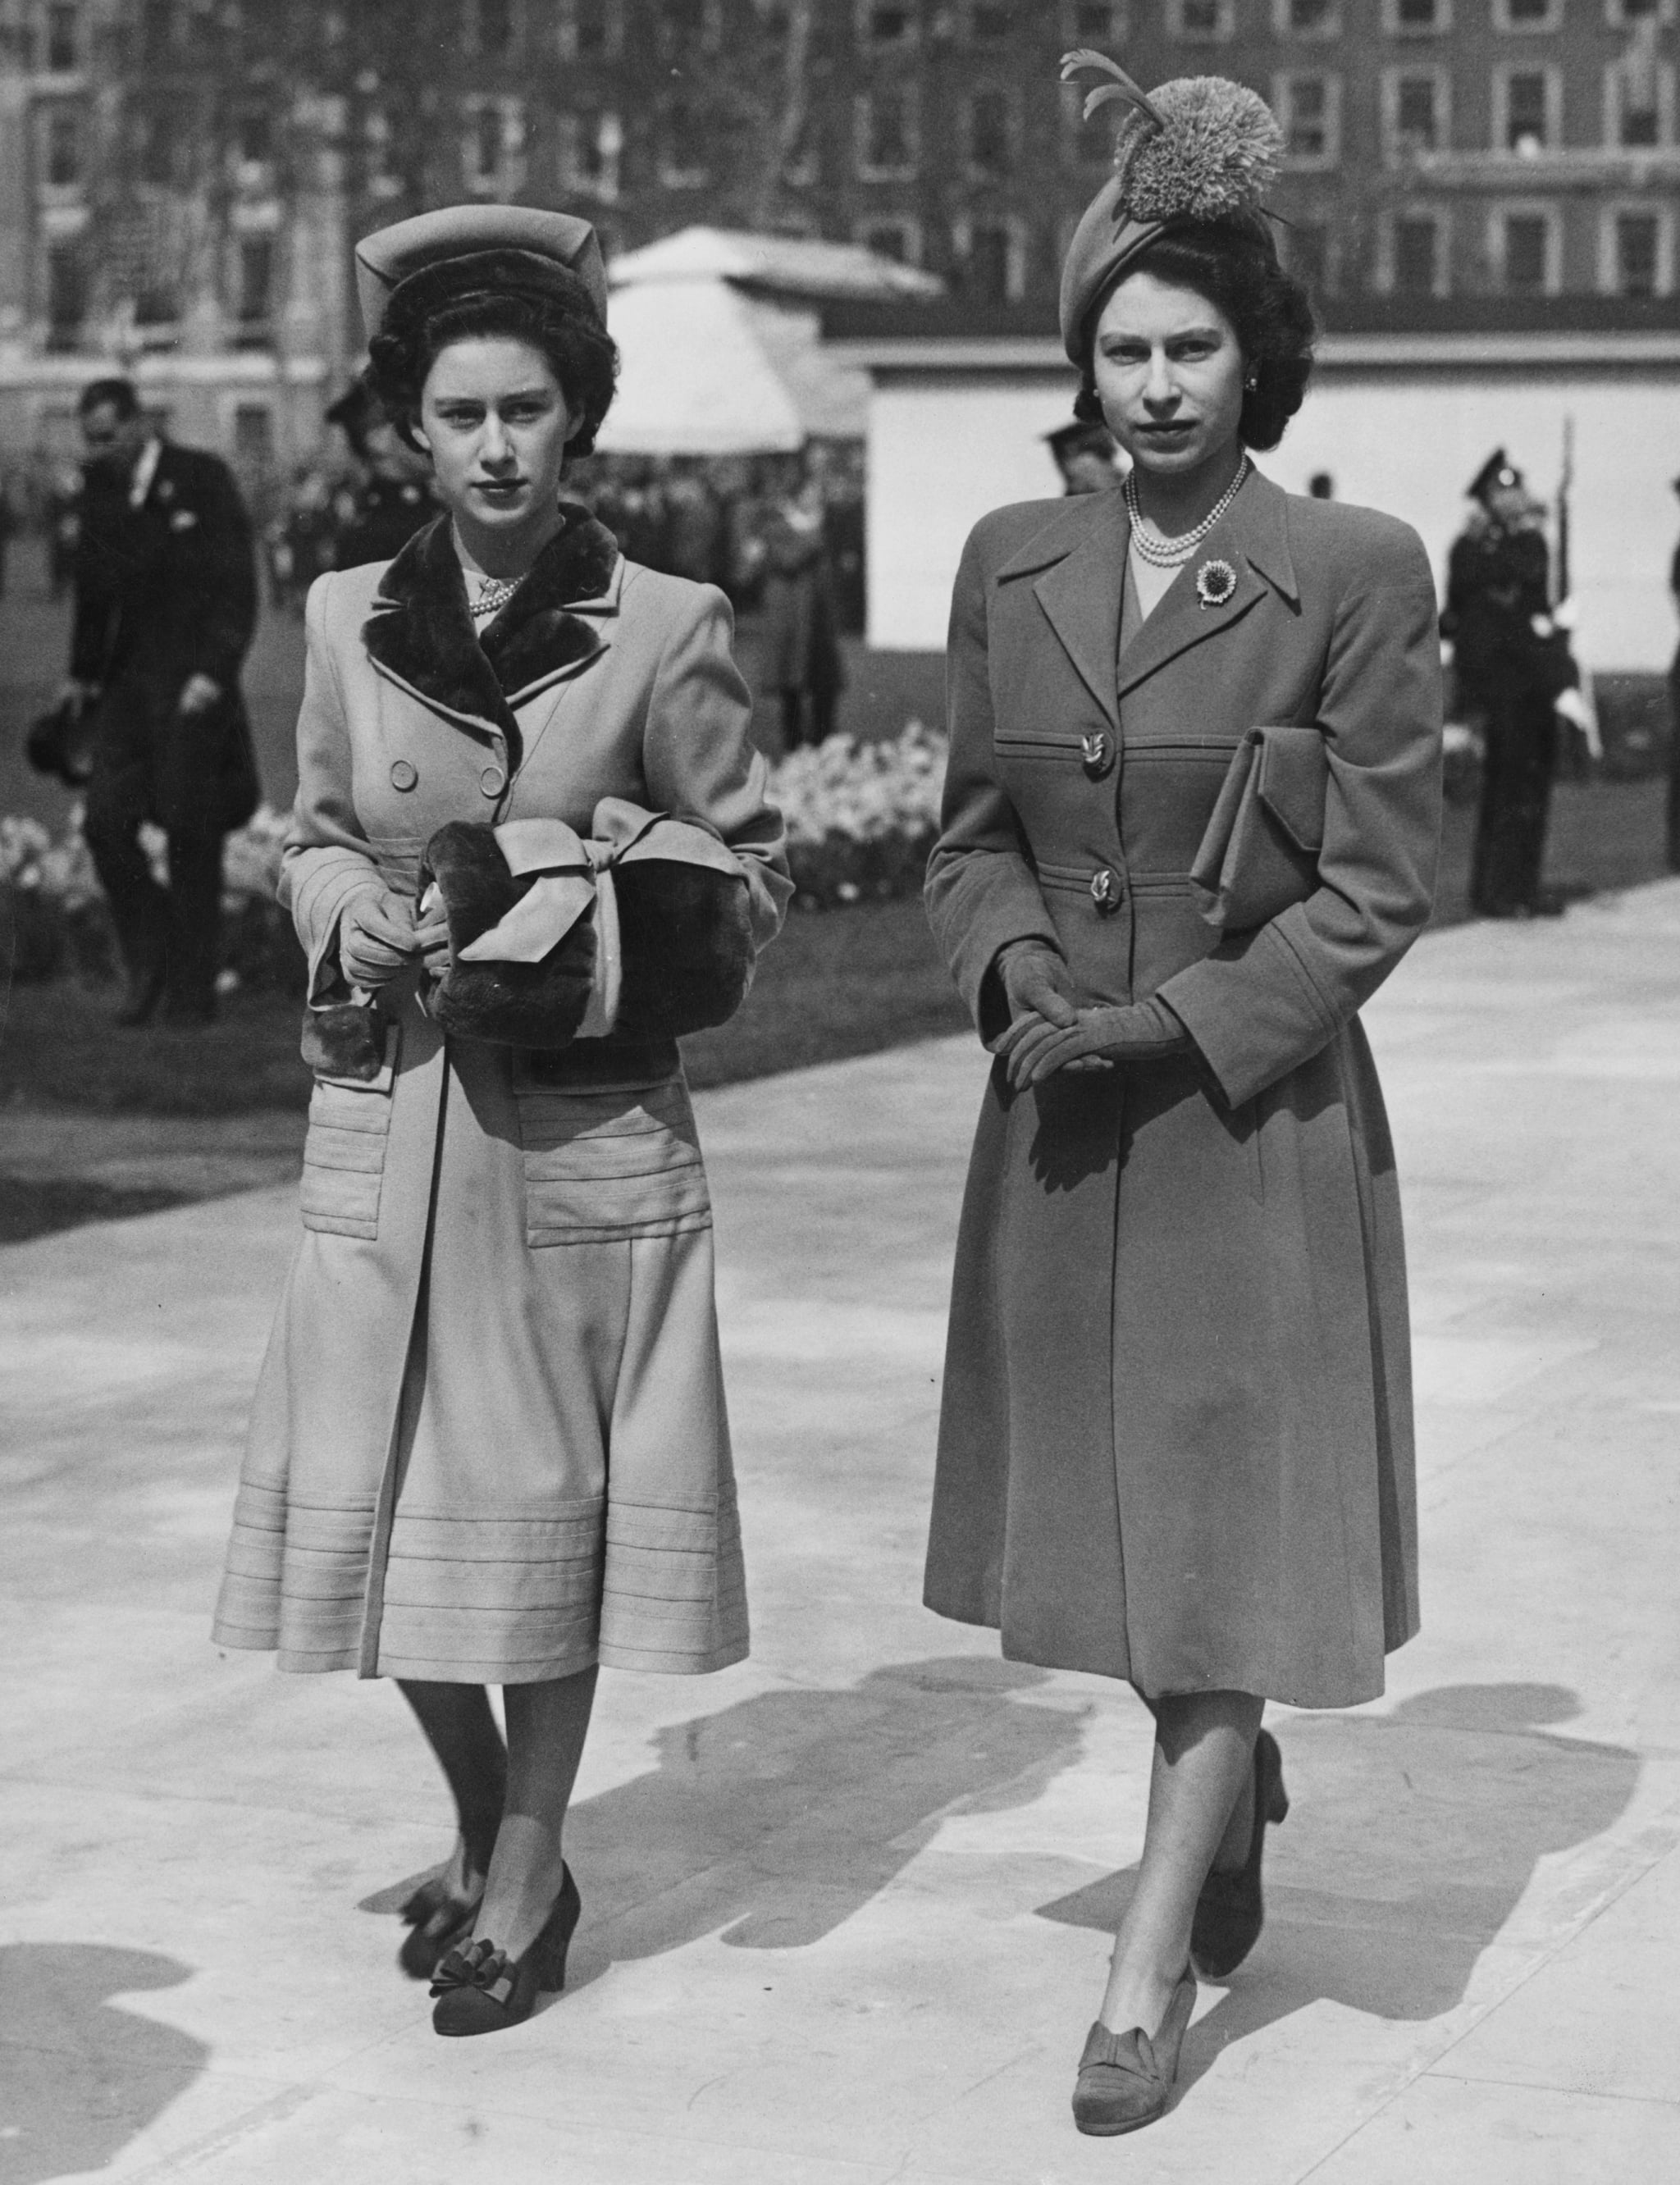 Princess Margaret (1930- 2002, left) and her sister, Princess Elizabeth (later Queen Elizabeth II) leaving Grosvenor Square, London, after the unveiling of the memorial to American President Franklin Delano Roosevelt, 10th April 1948.  (Photo by Fox Photos/PNA//Hulton Archive/Getty Images)